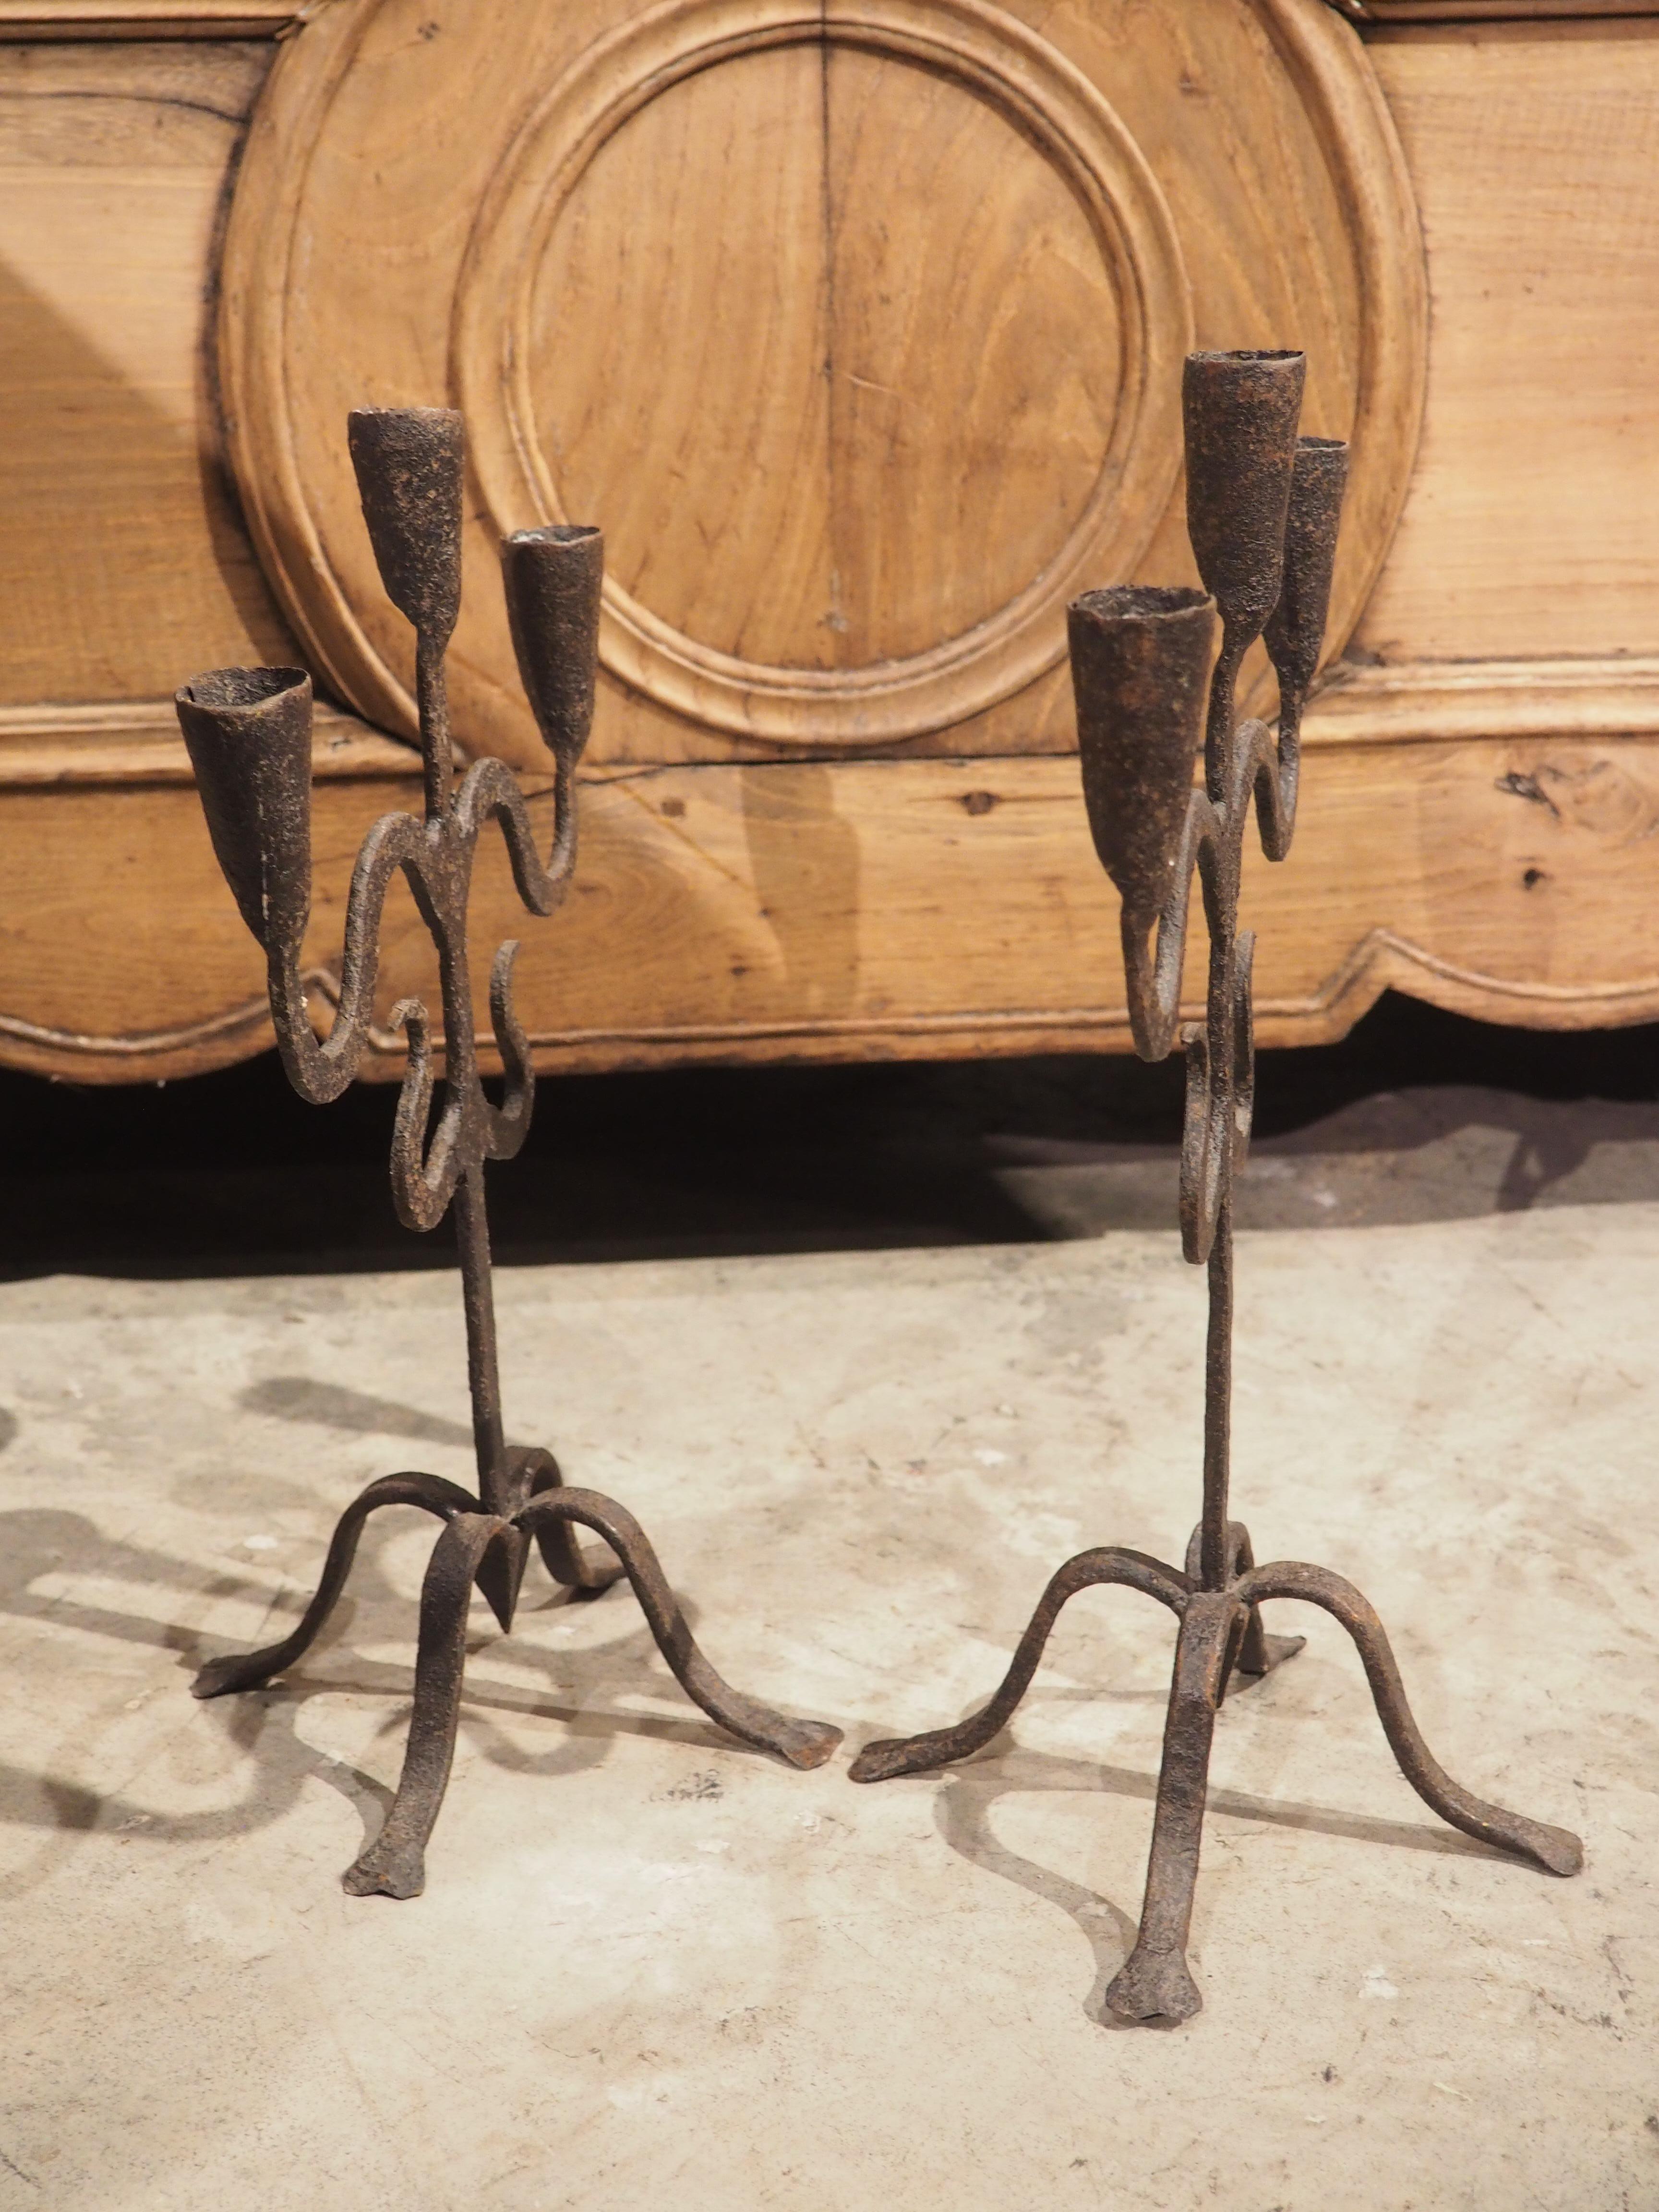 Early 19th Century Pair of Hand Forged Iron Candle Holders from Spain, circa 1800